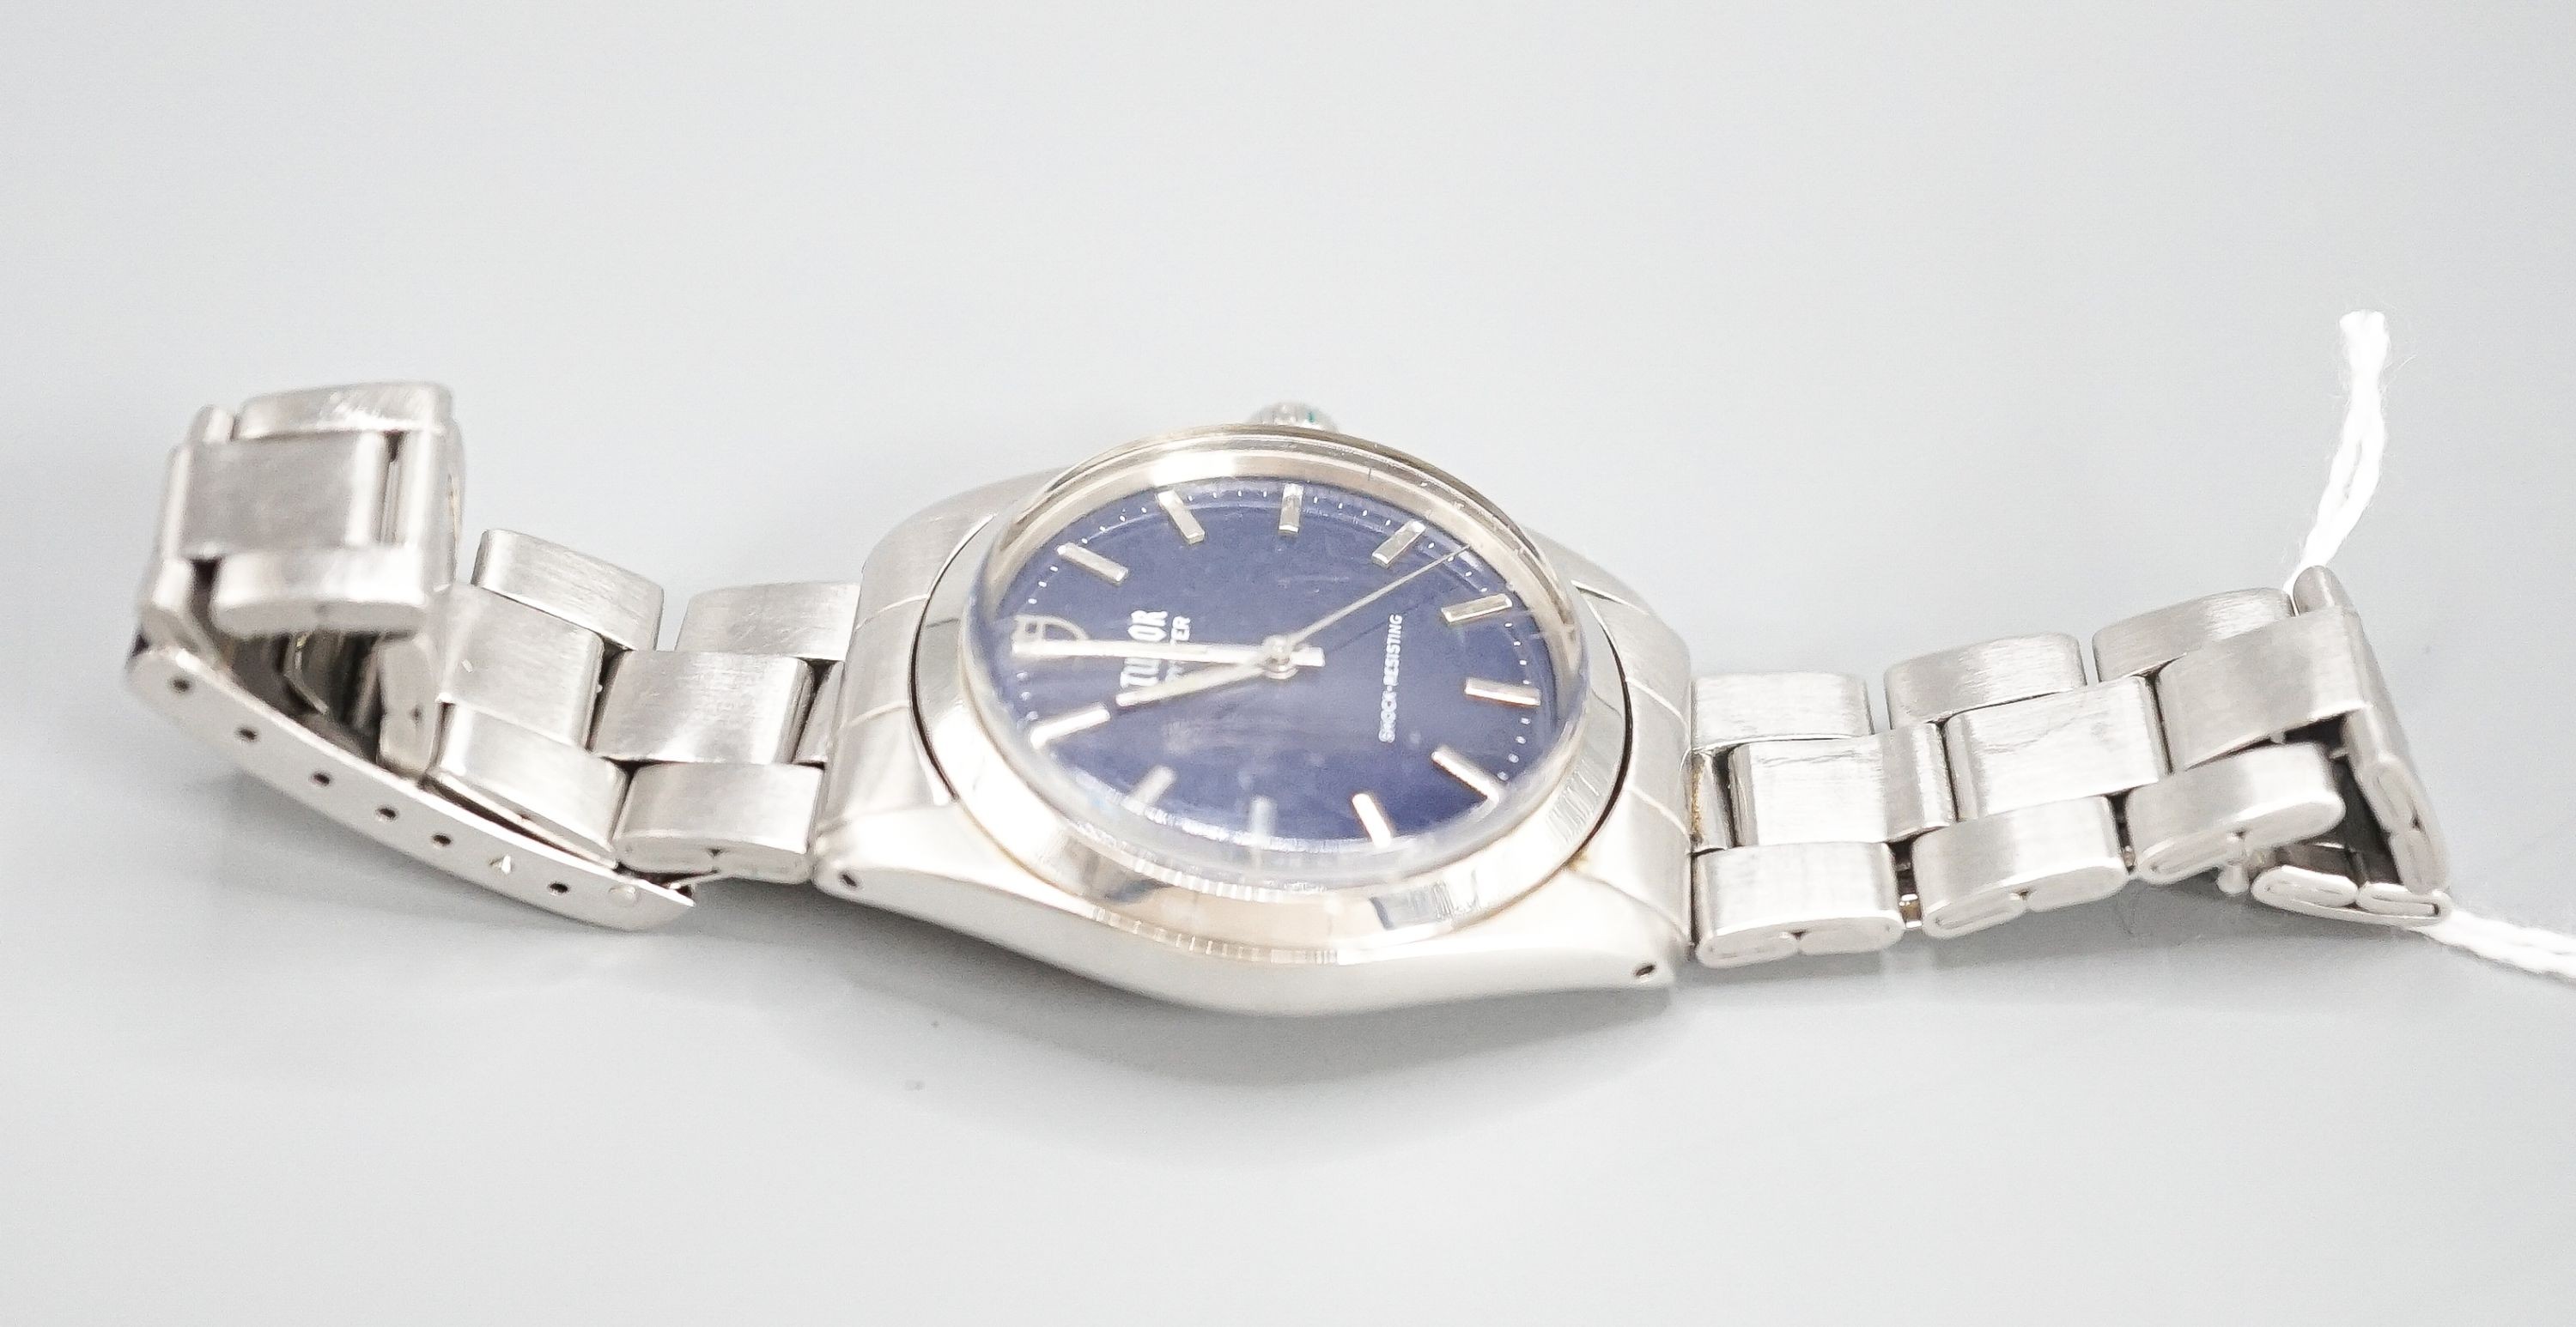 A gentleman's stainless steel Tudor Oyster manual wind wrist watch, with blue dial, on Rolex bracelet, case diameter 34mm, no box or papers.